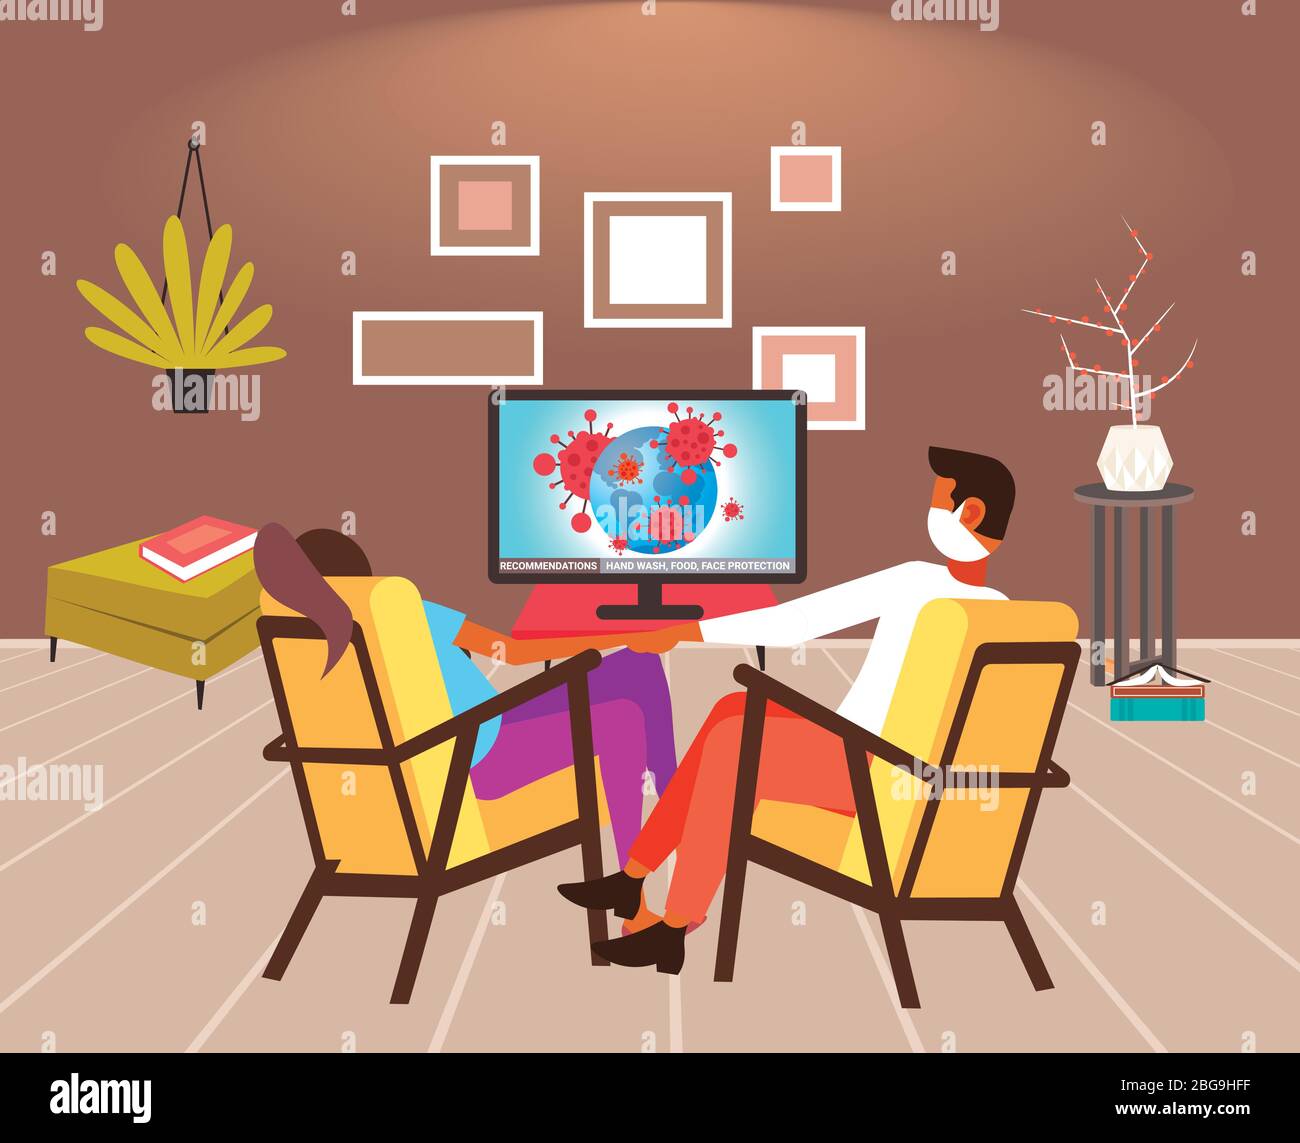 couple sitting at home on self-isolation man woman in masks watching tv 2019-nCoV flu spreading of world floating influenza virus concept living room interior horizontal vector illustration Stock Vector